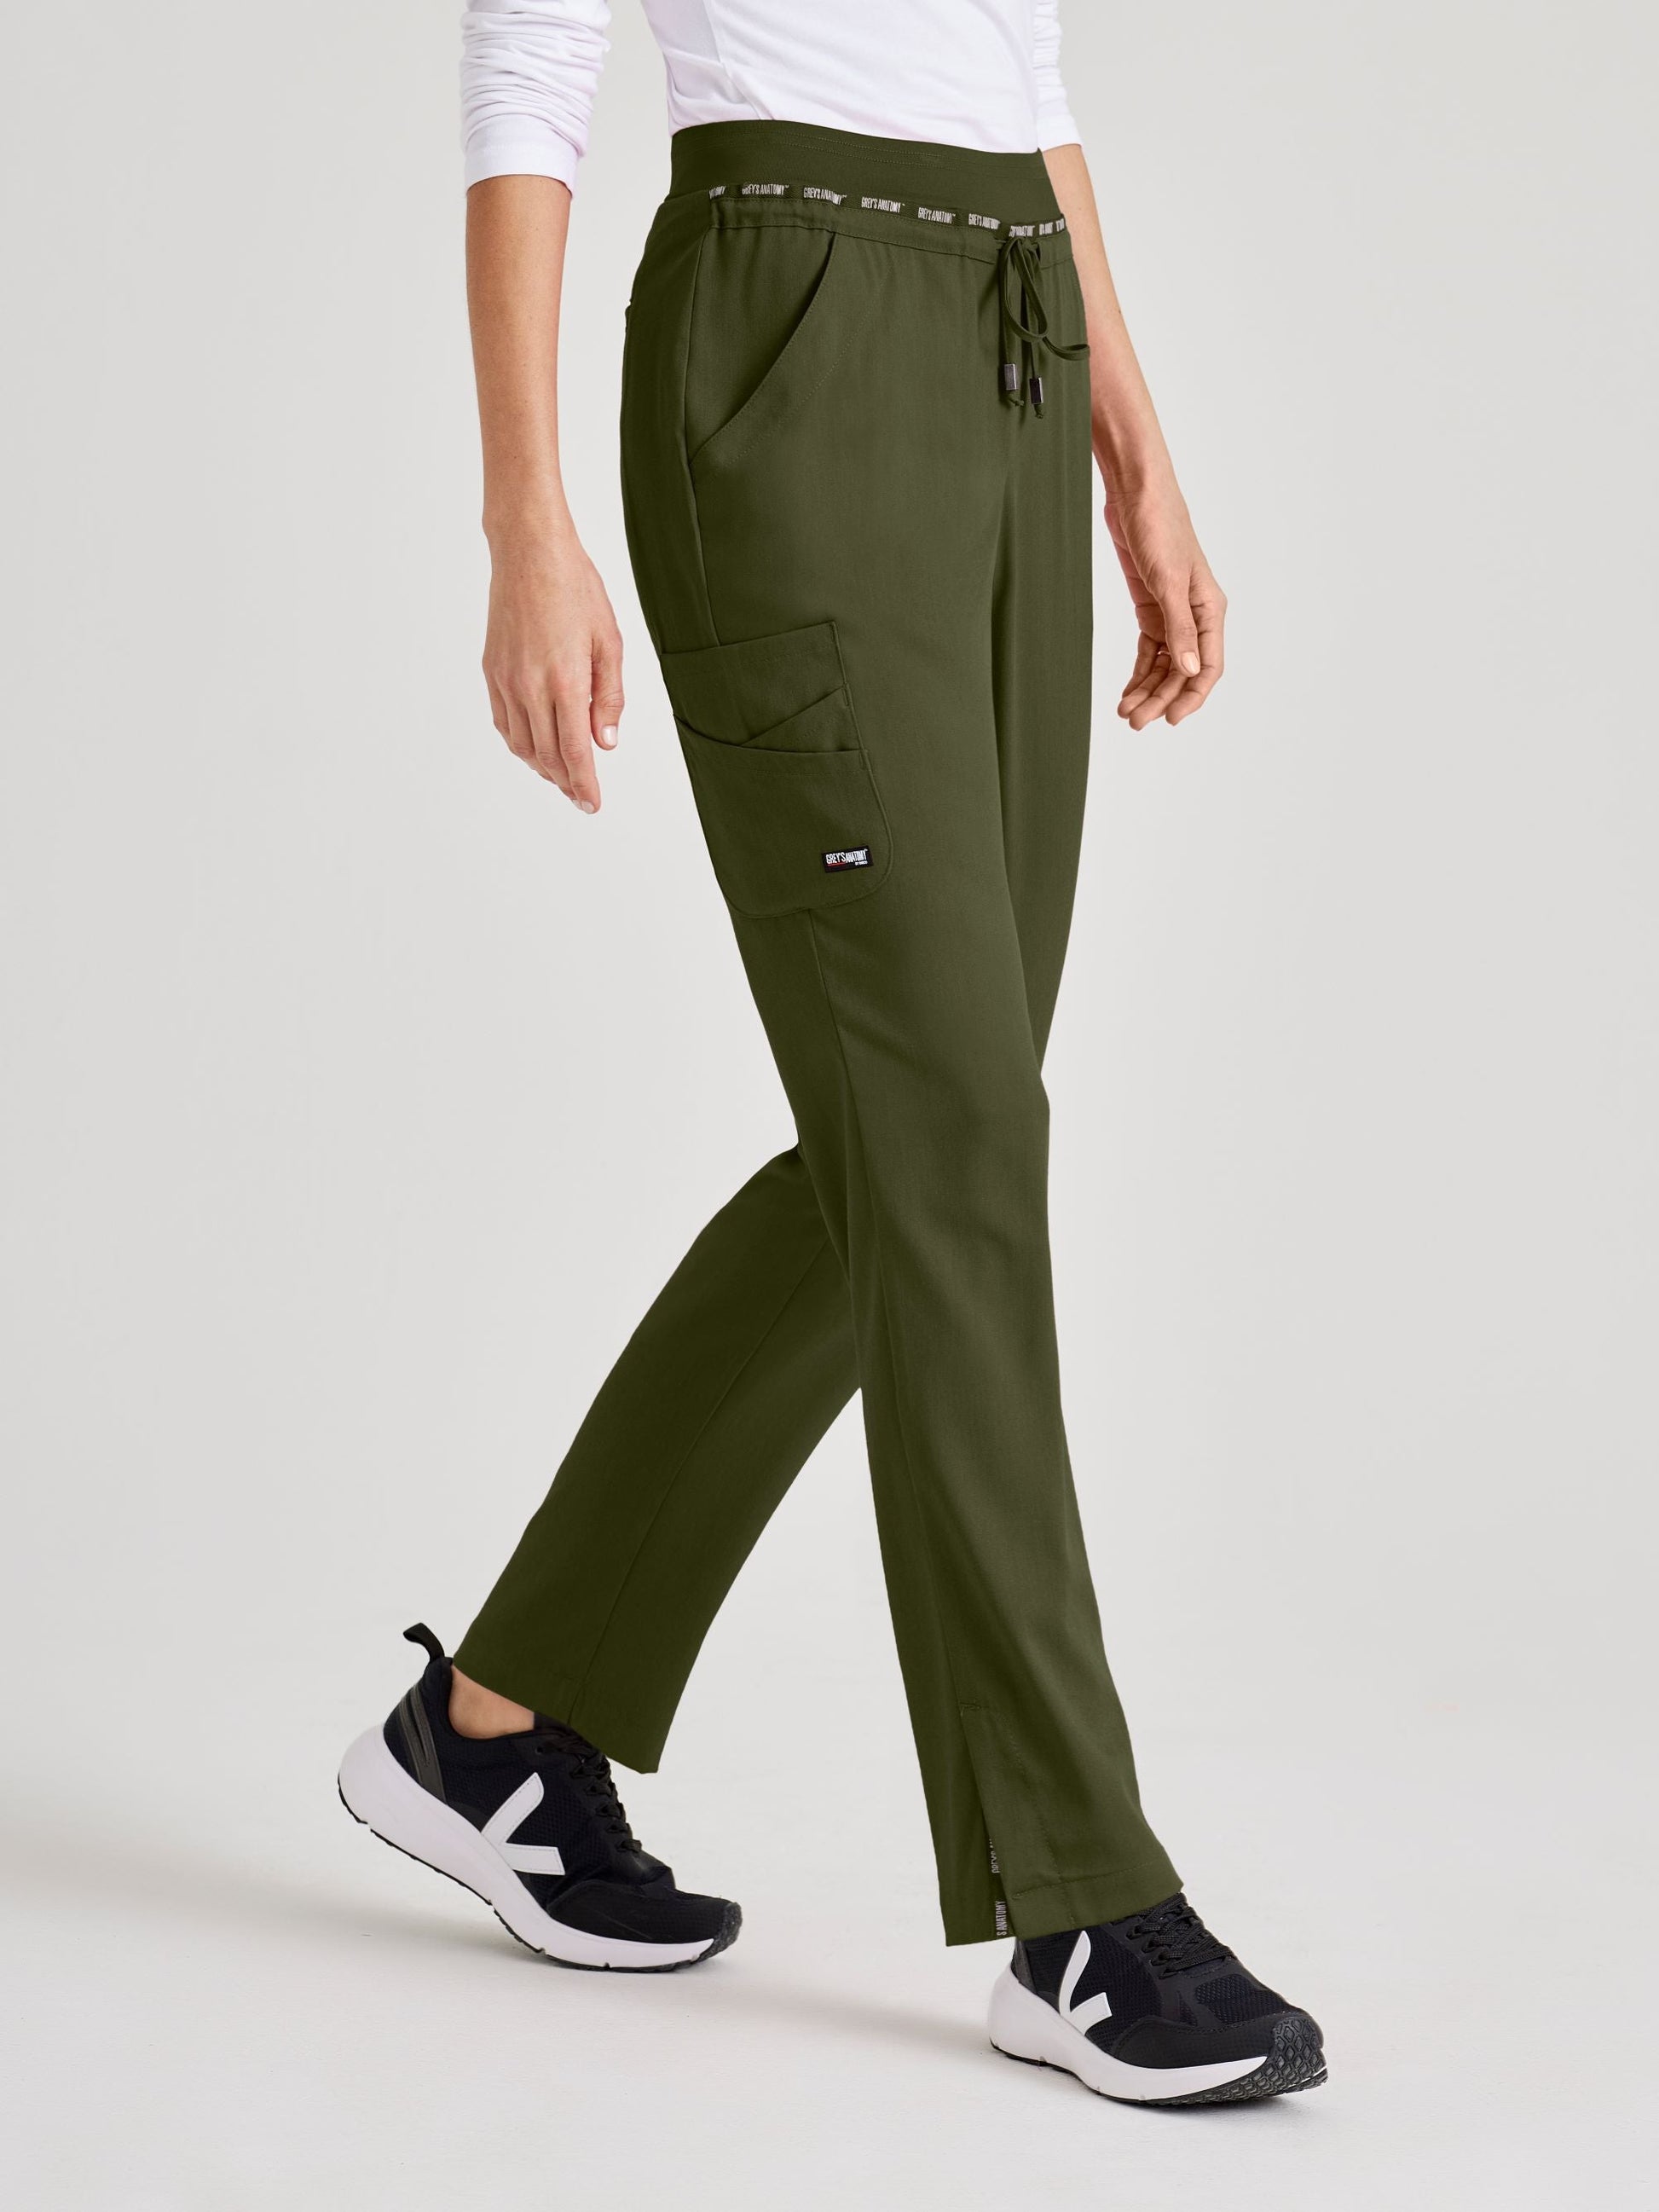 Barco Grey's Anatomy +SpandexStretch GRSP526 Serena Tapered Pant Olive